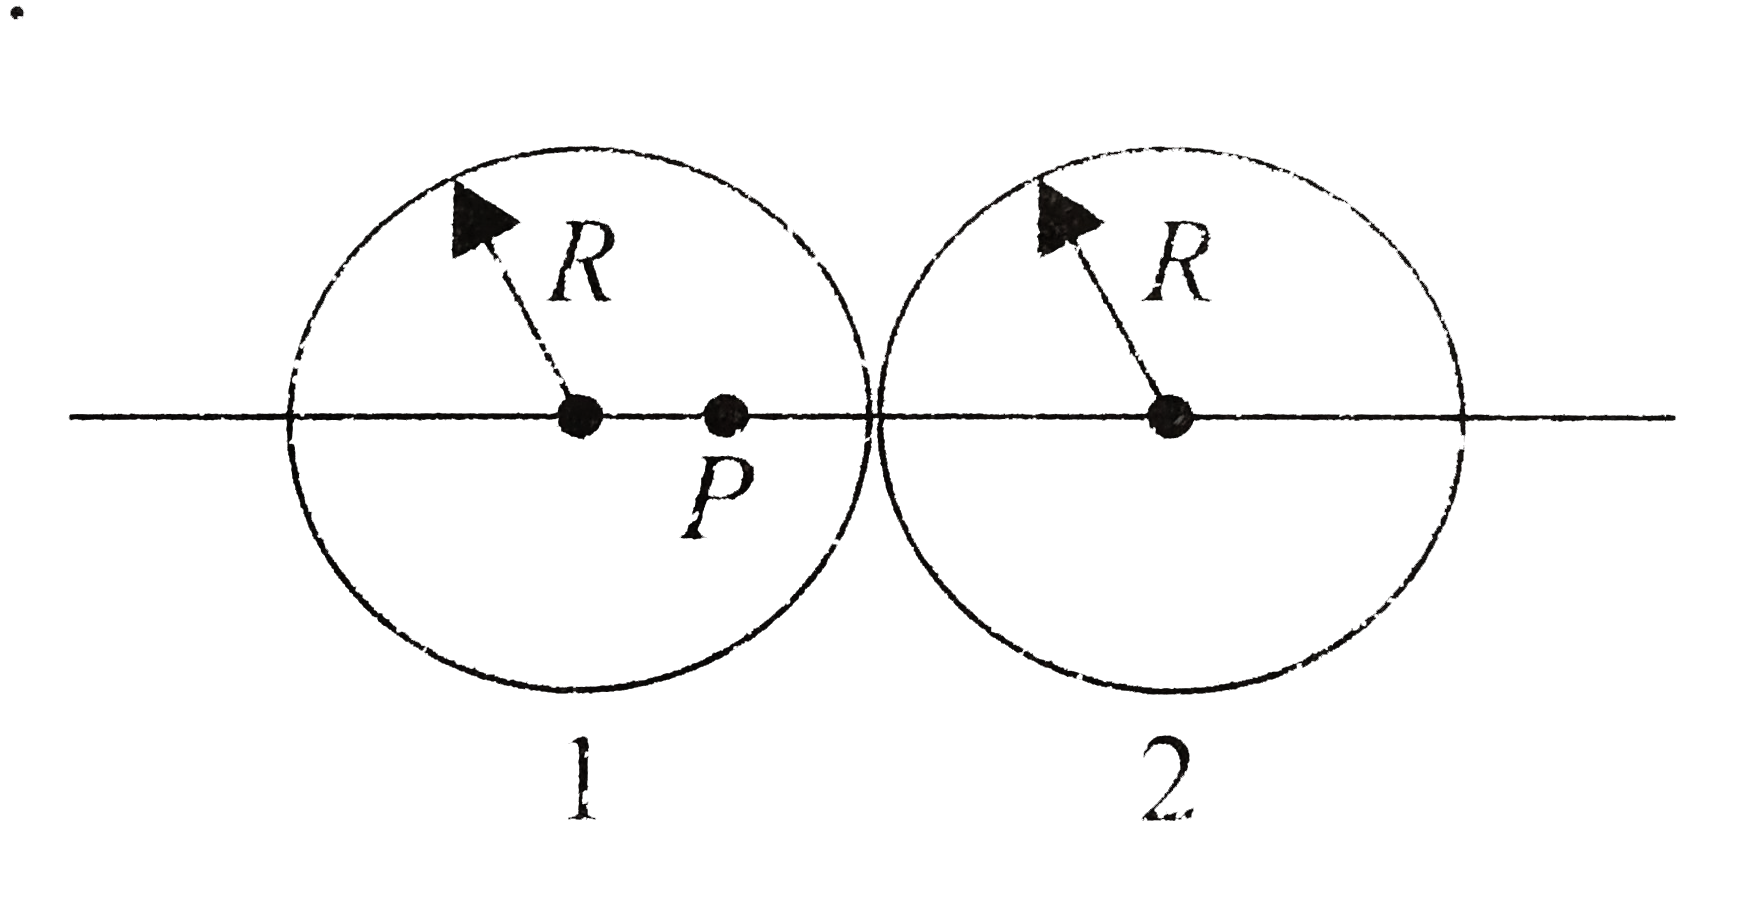 Figure shows, in cross section , two solid spheres with uniformly distributed charge throughout their volumes. Each has radius R. Point O lies on a line connecting the centers of the spheres, at radial distance R//2 from the center of sphere 1. If the net electric field at point P is zero, and Q1 is 64muC and Q2 = 8xmuC, what is the value of x.